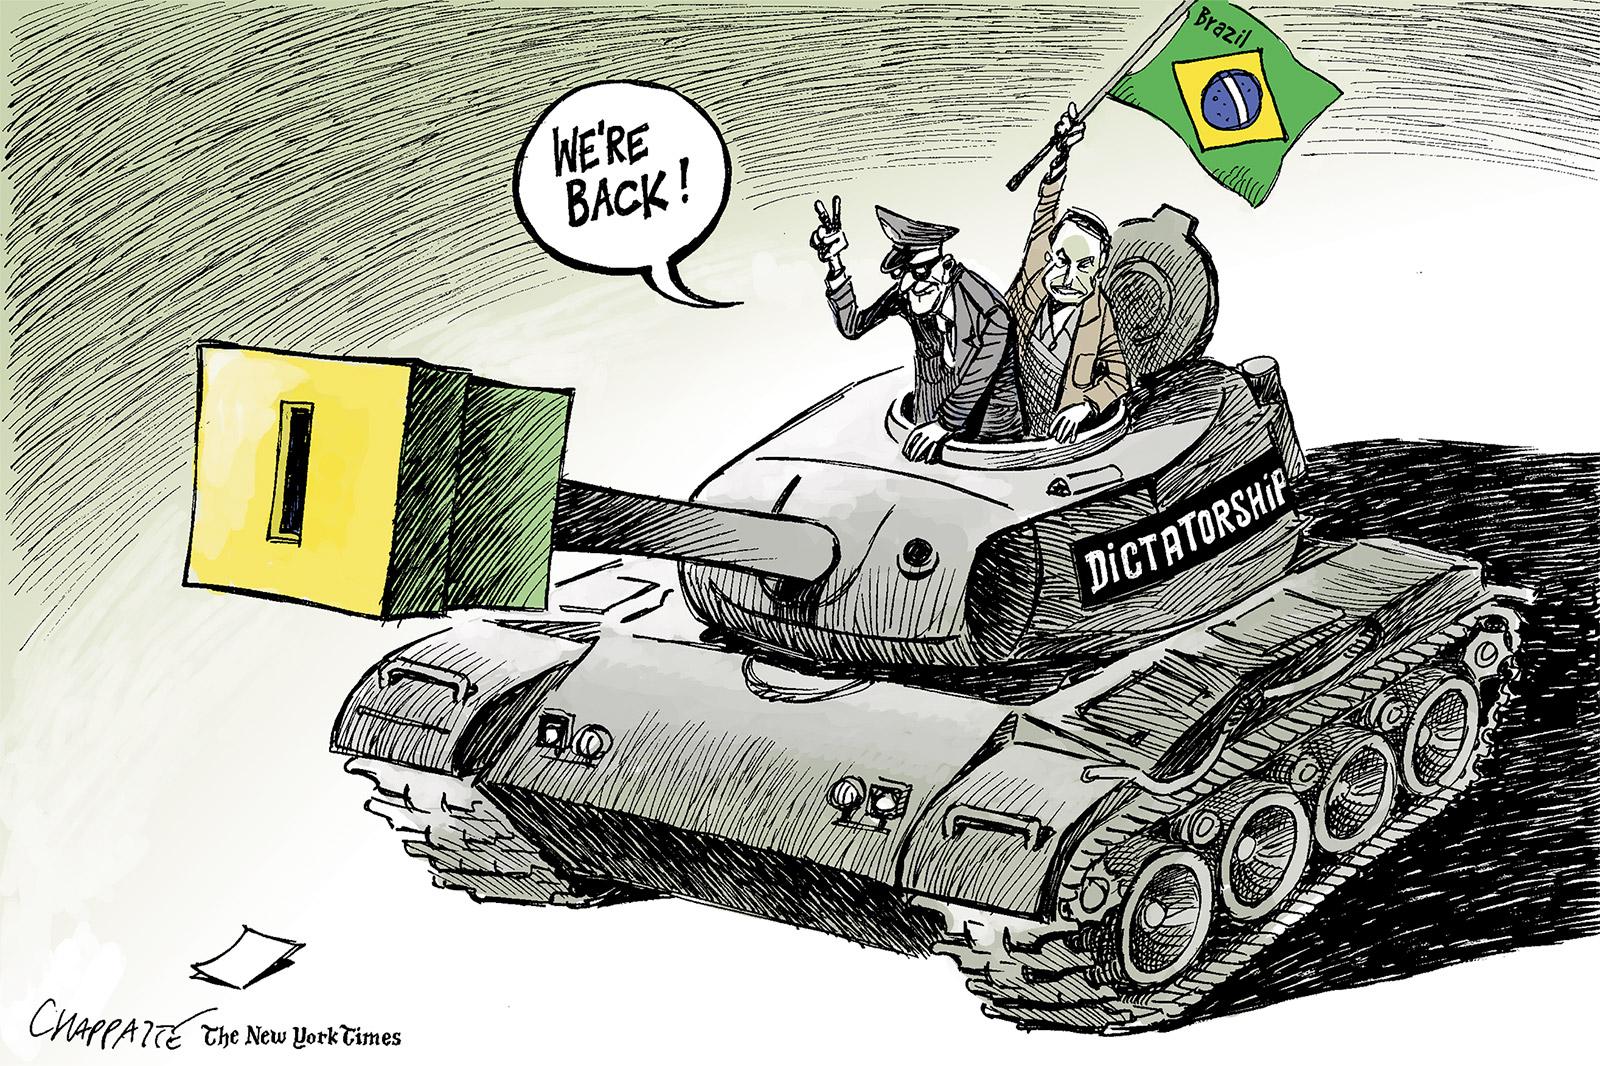 Brazil elects an extremist